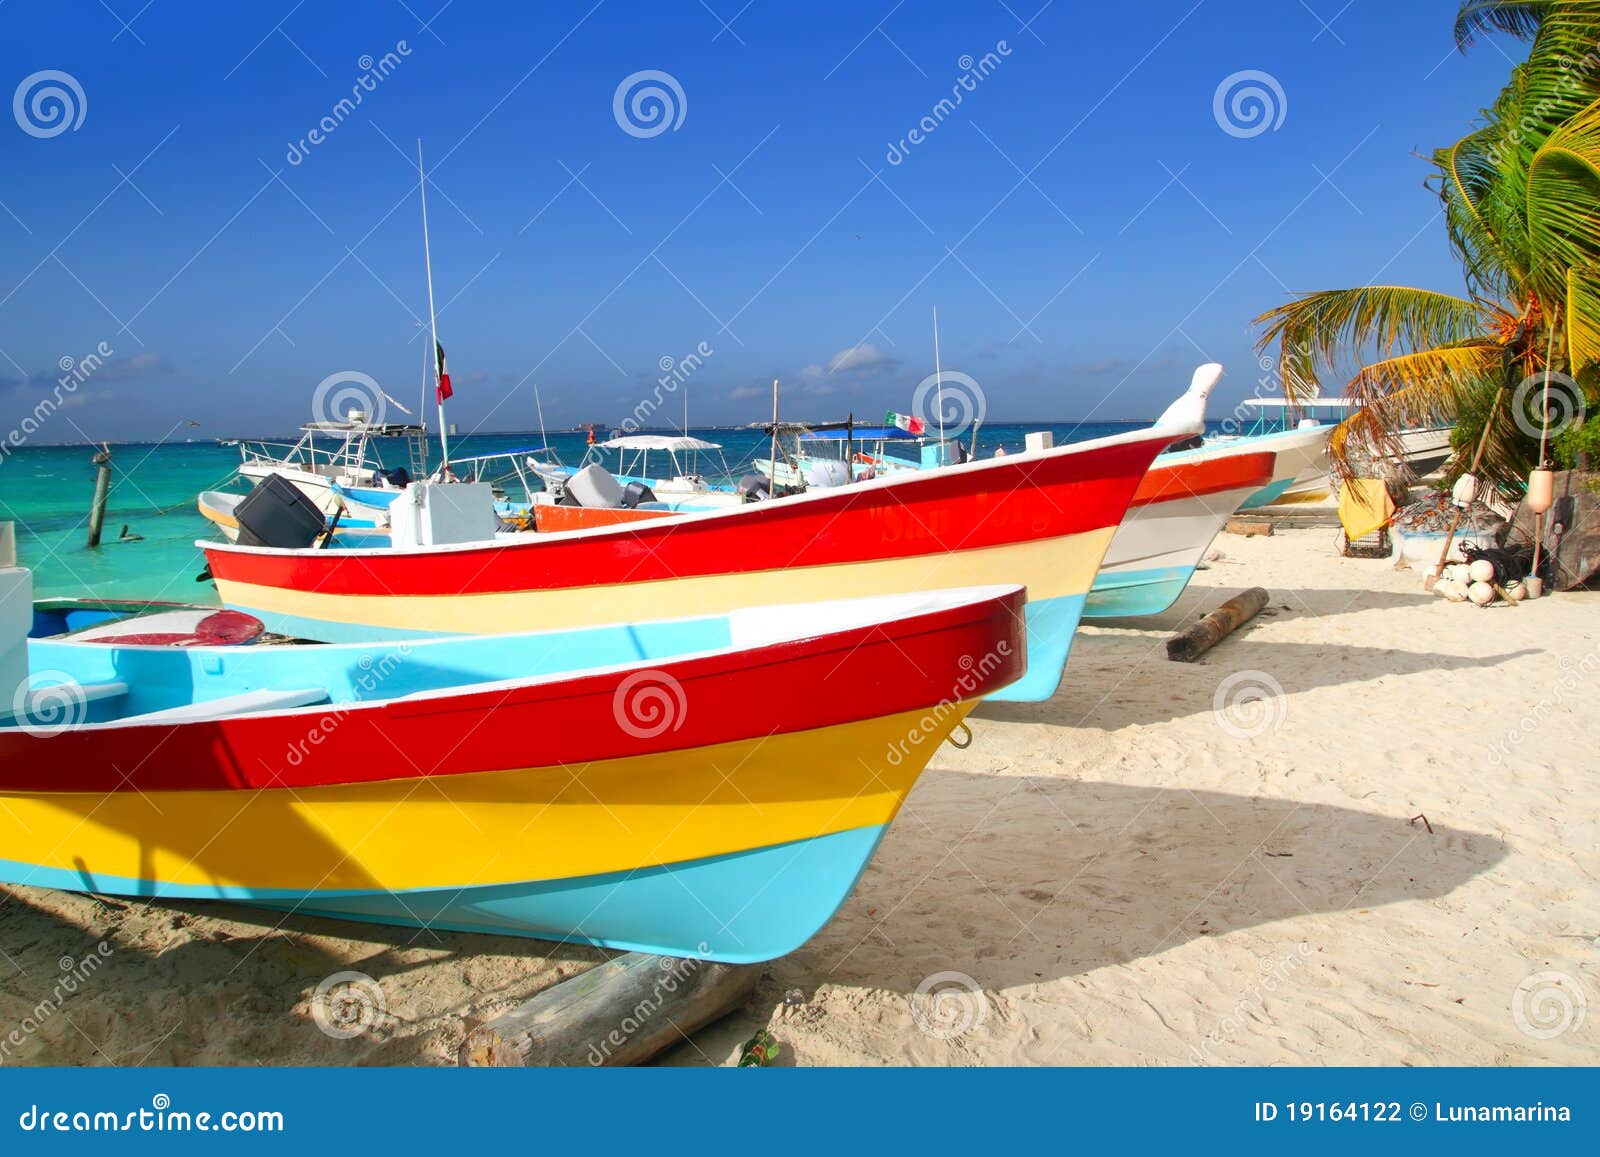 colorful tropical boats in sand isla mujeres